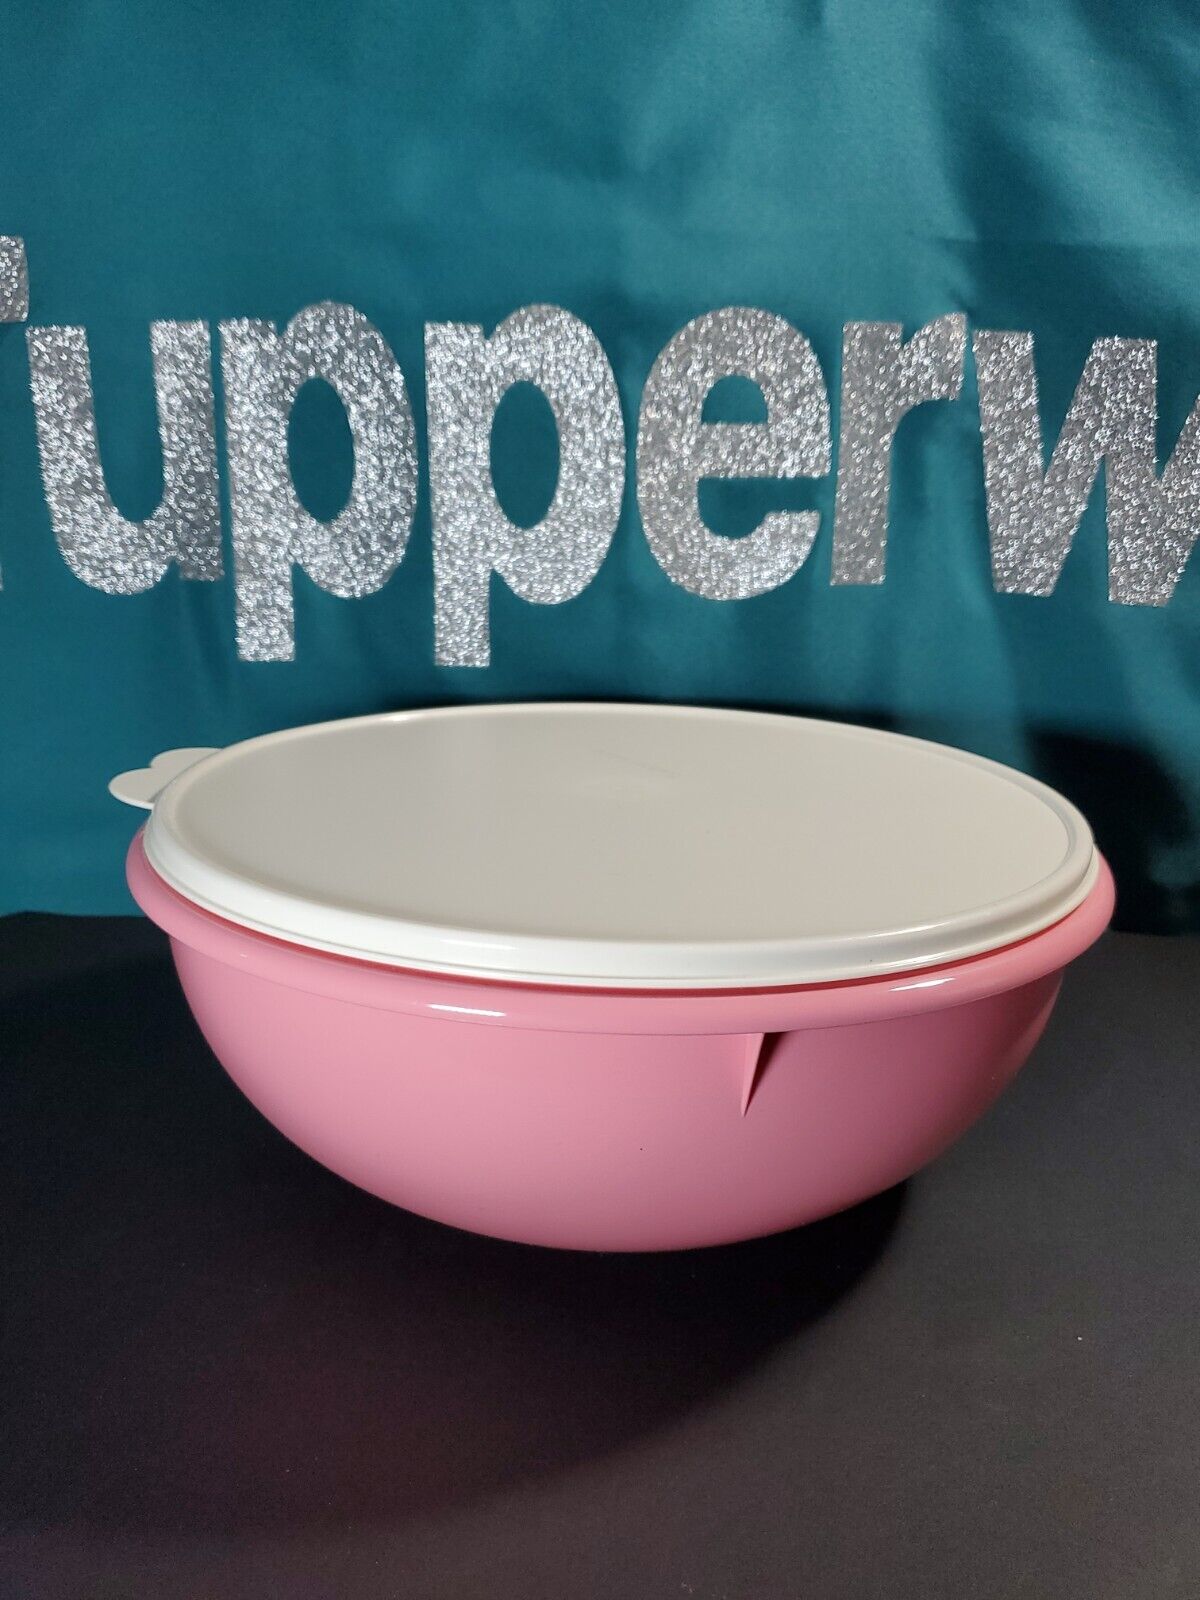 New Tupperware Fix n mix Bowl 26 Cup Vintage Collection Pink Cake Bowl New